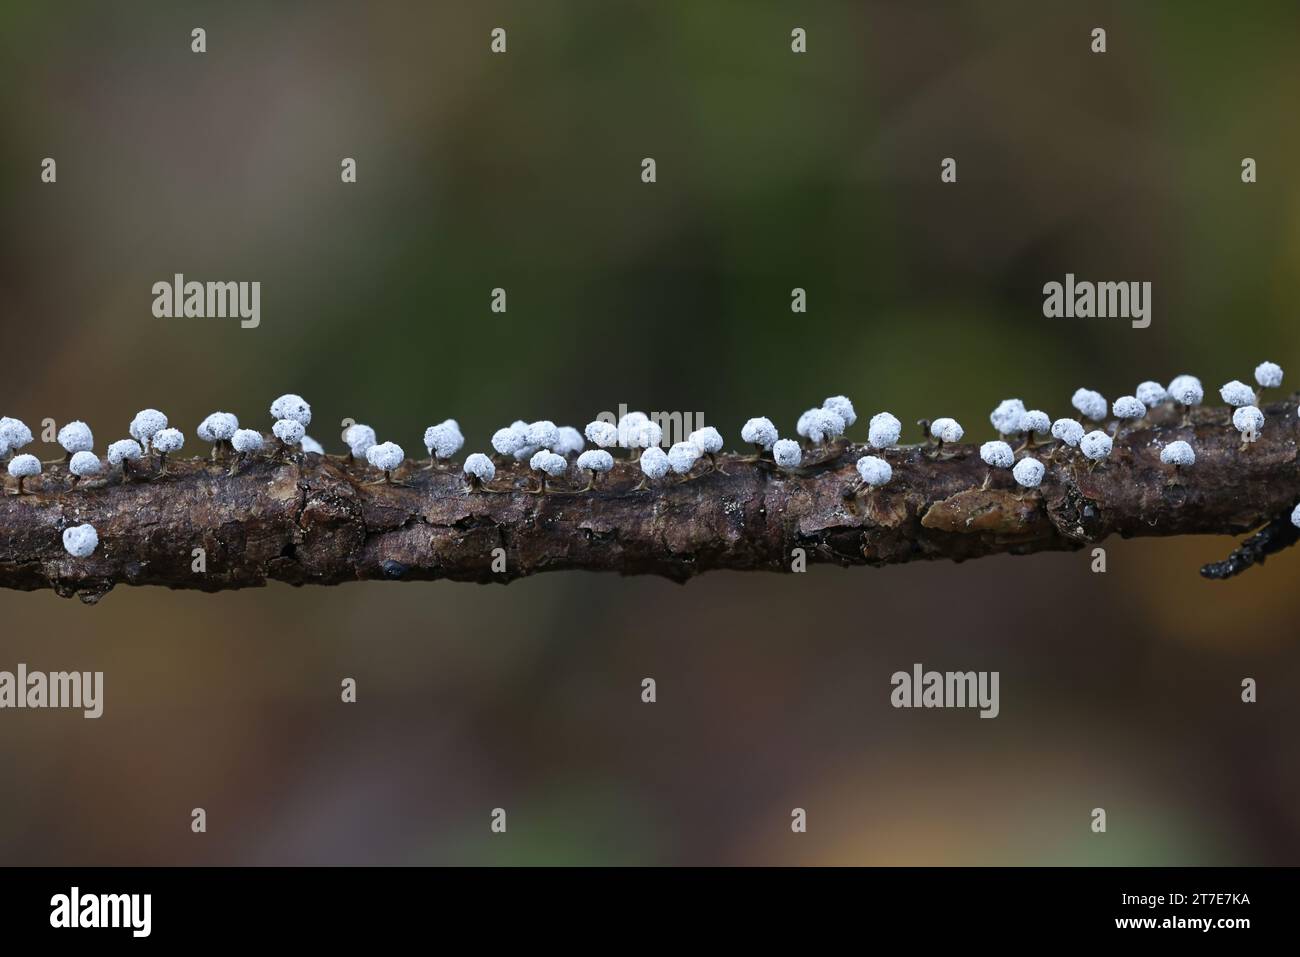 Didymium nigripes, a slime mold from Finland, no common English name Stock Photo